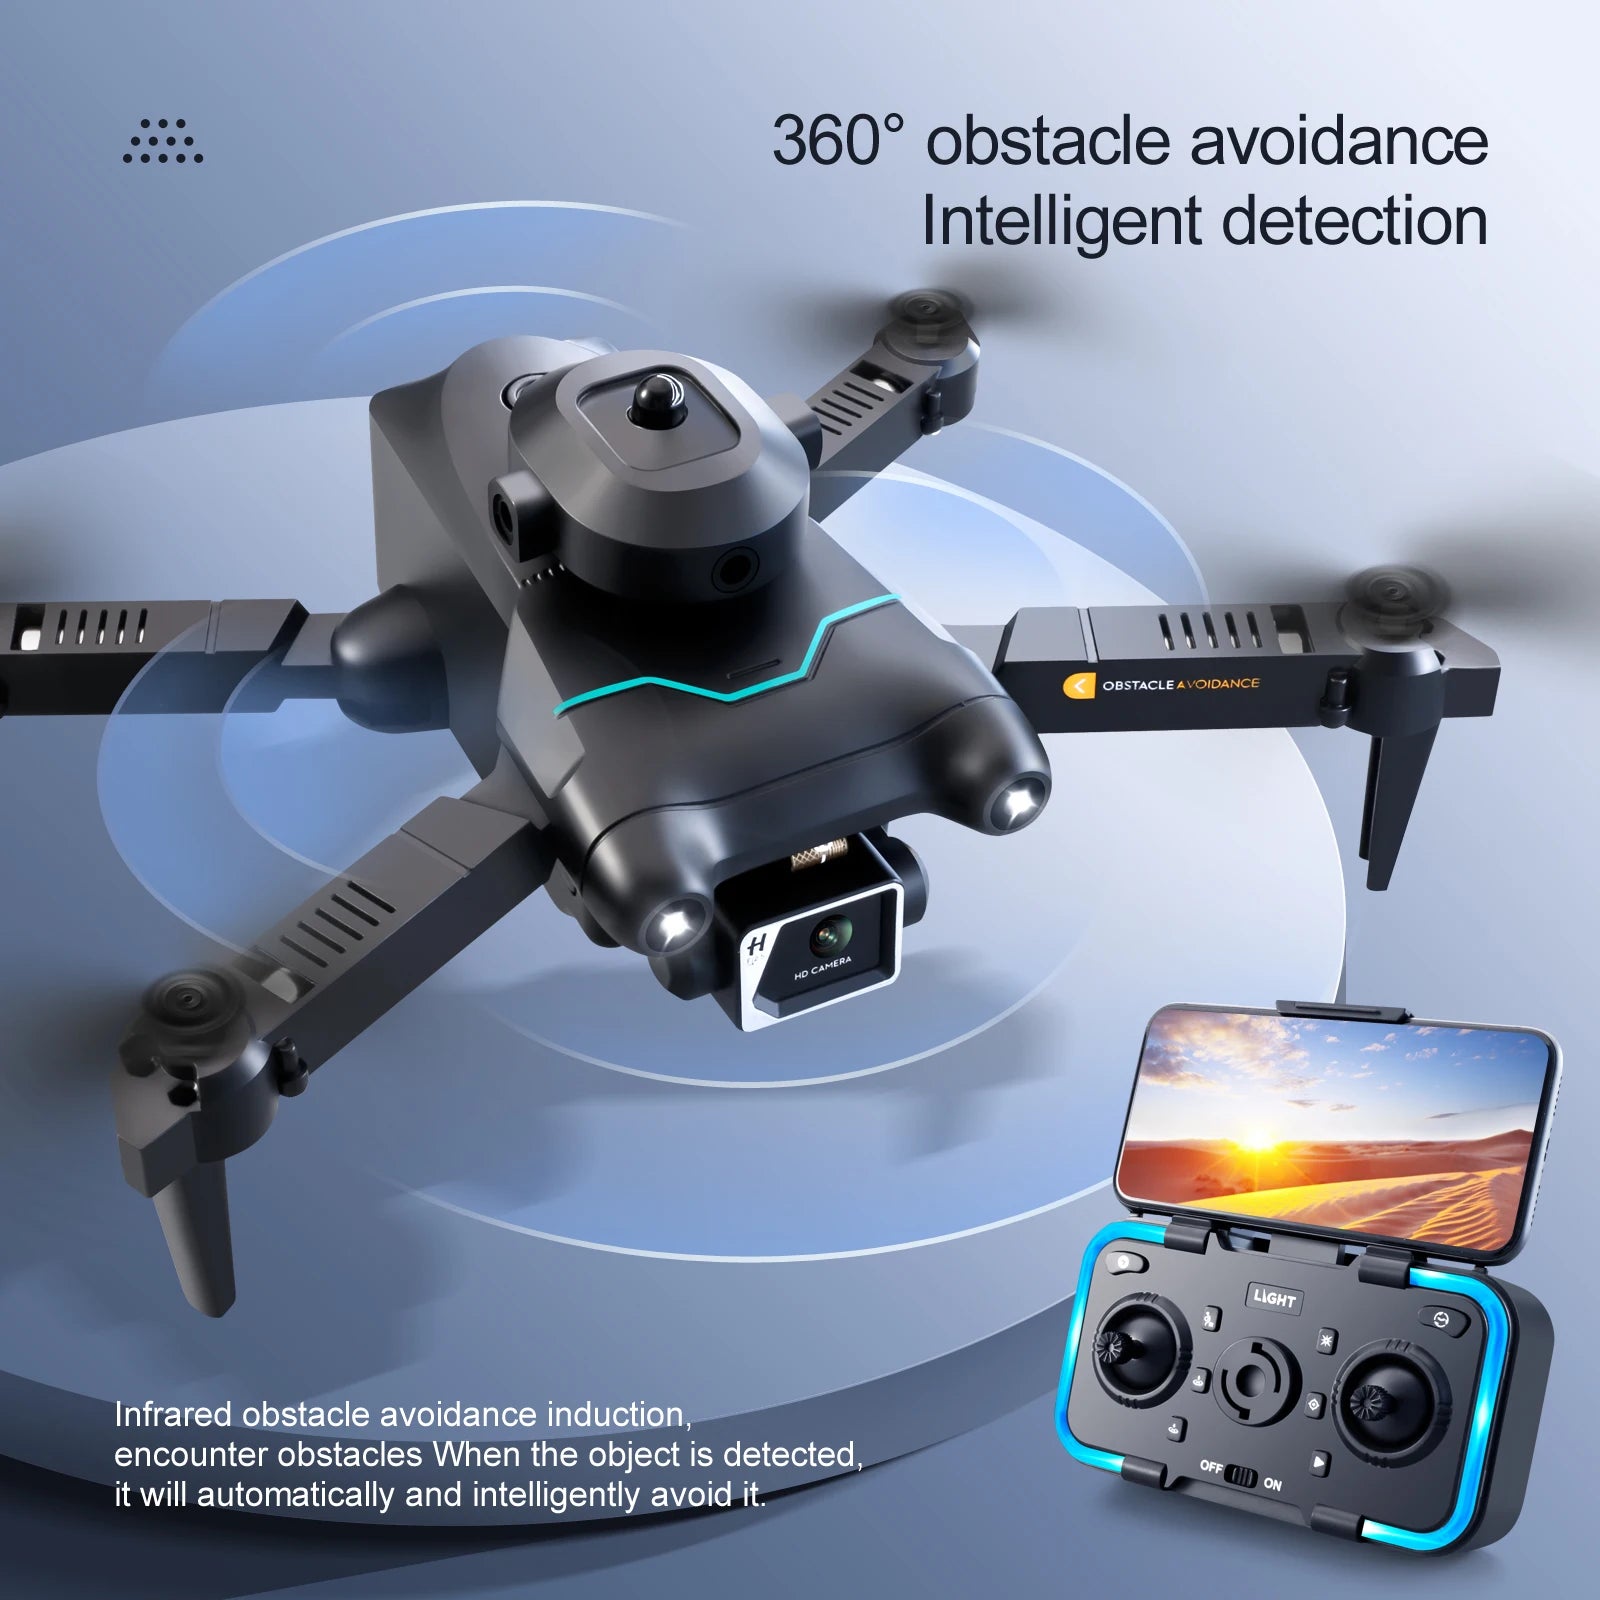 S96 Mini Drone, when the object is detected, off on it will automatically and intelligently